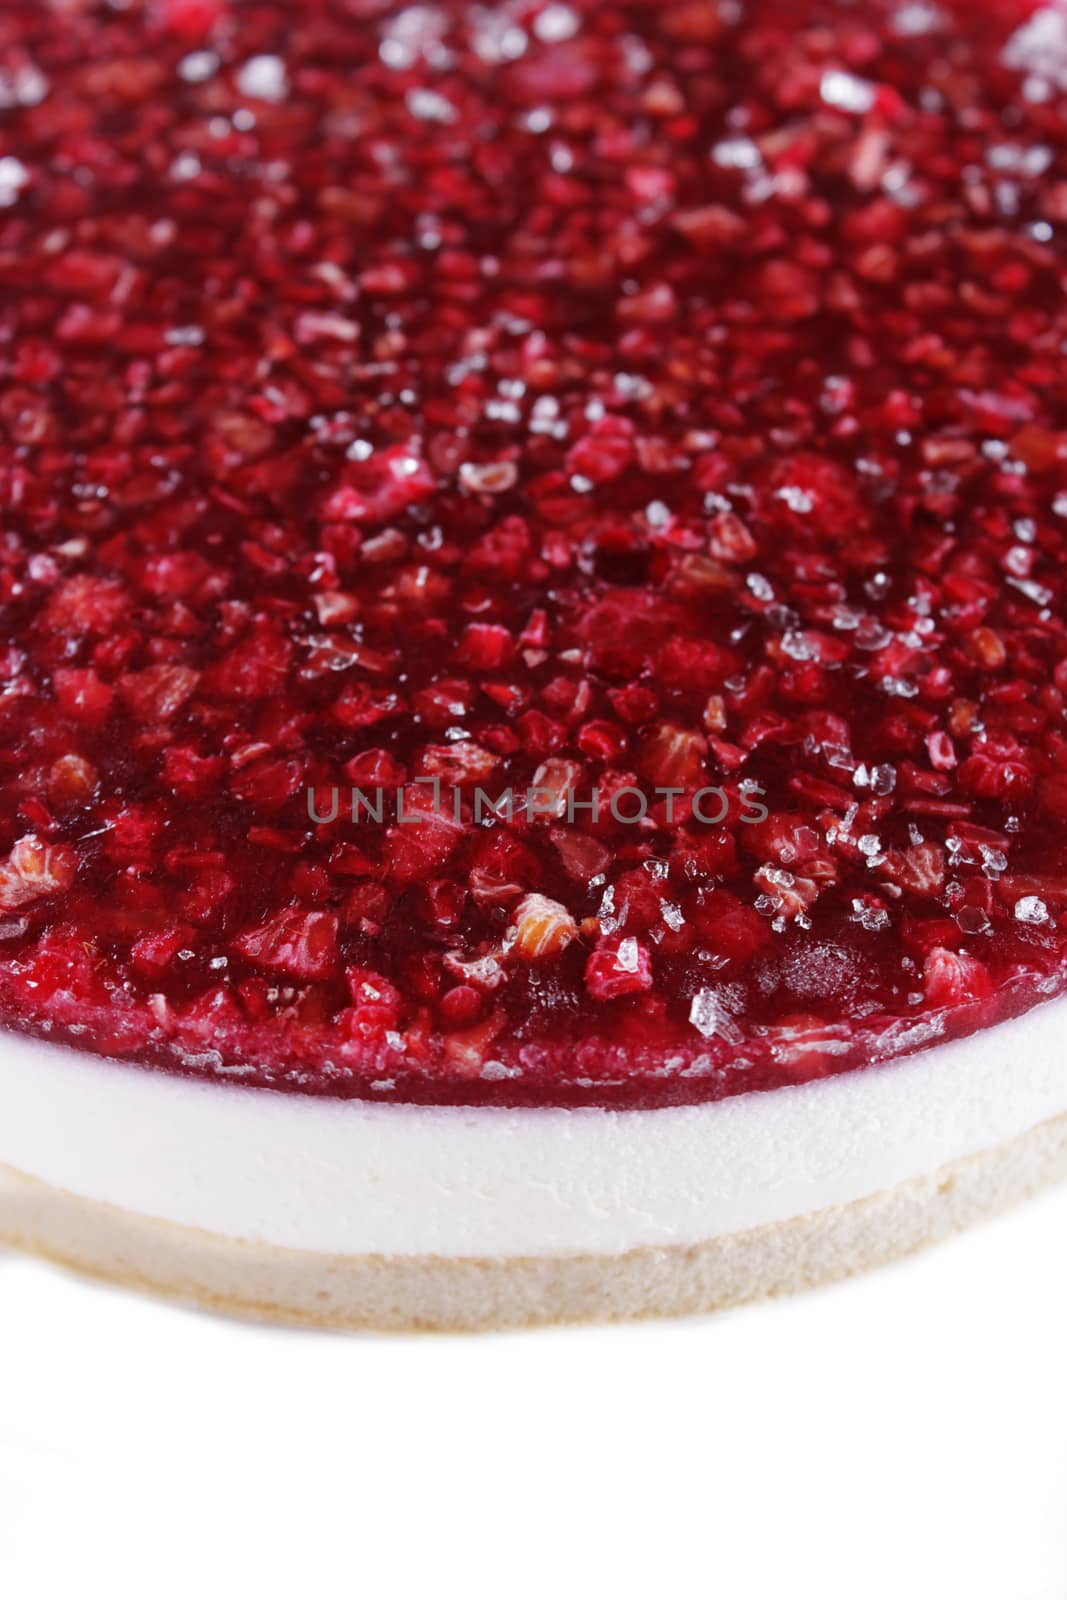 Part of cheesecake with raspberry on a plate over white